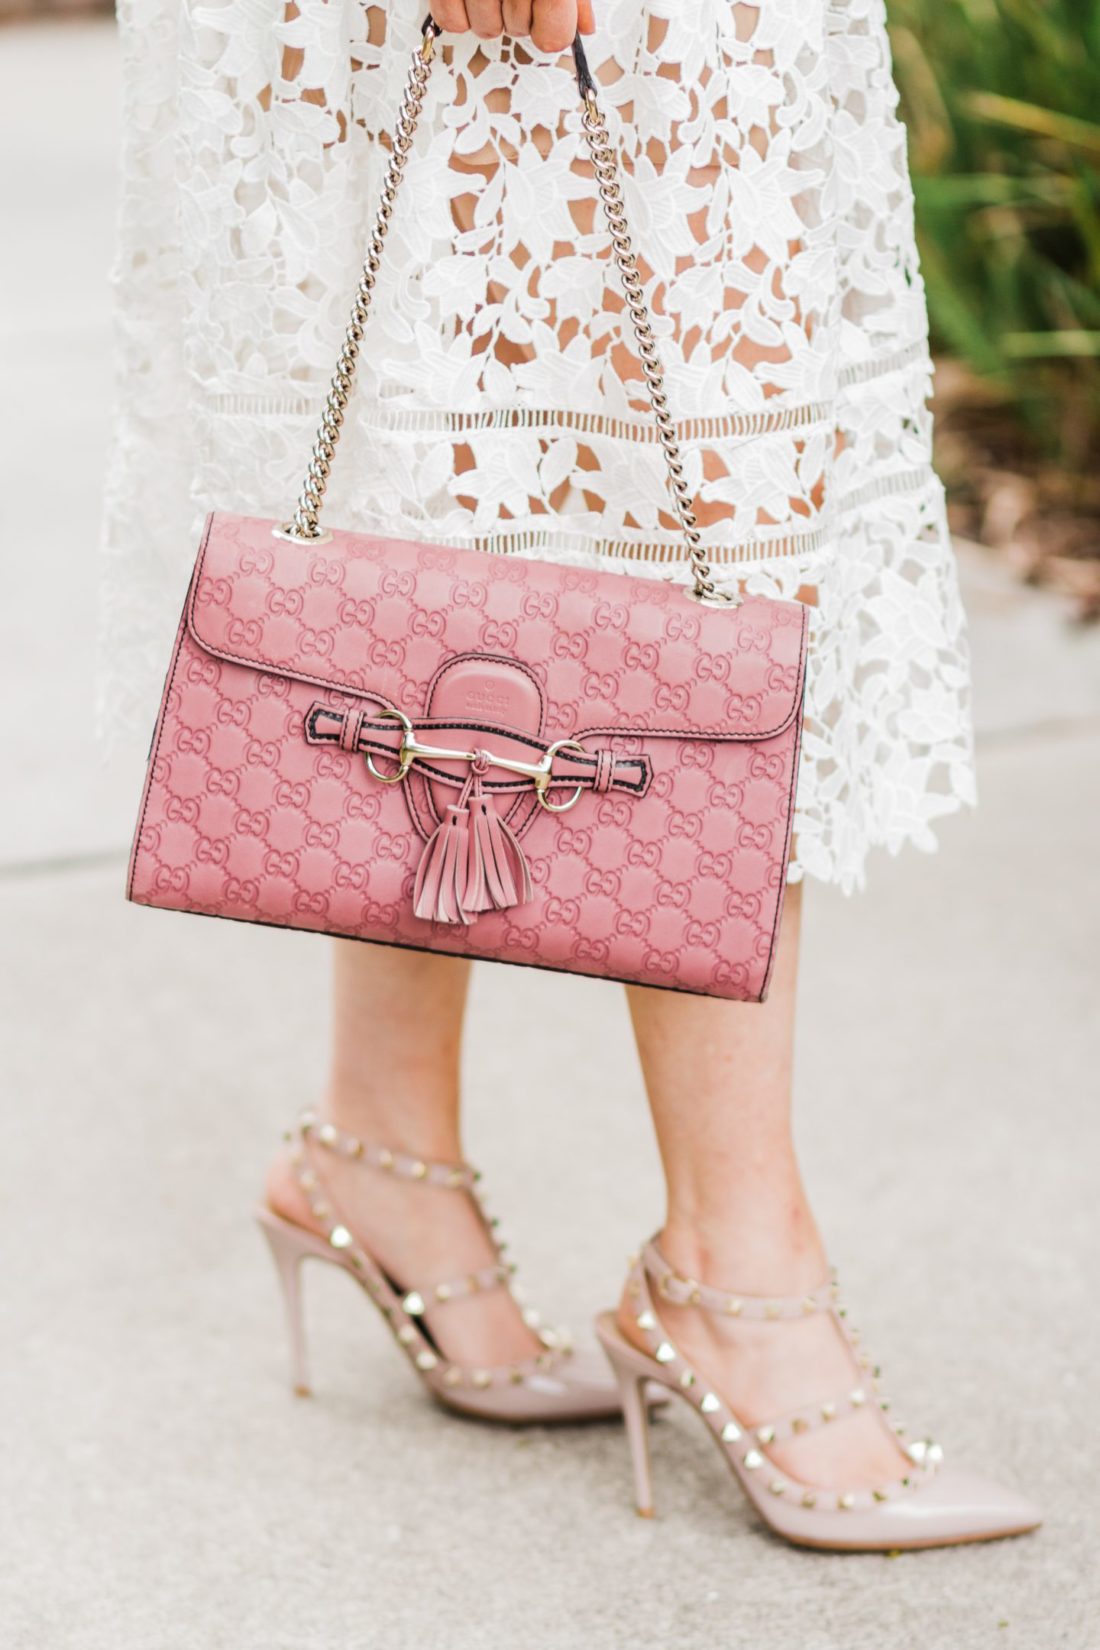 How to purchase designer handbags on a budget - Curated by Kirsten